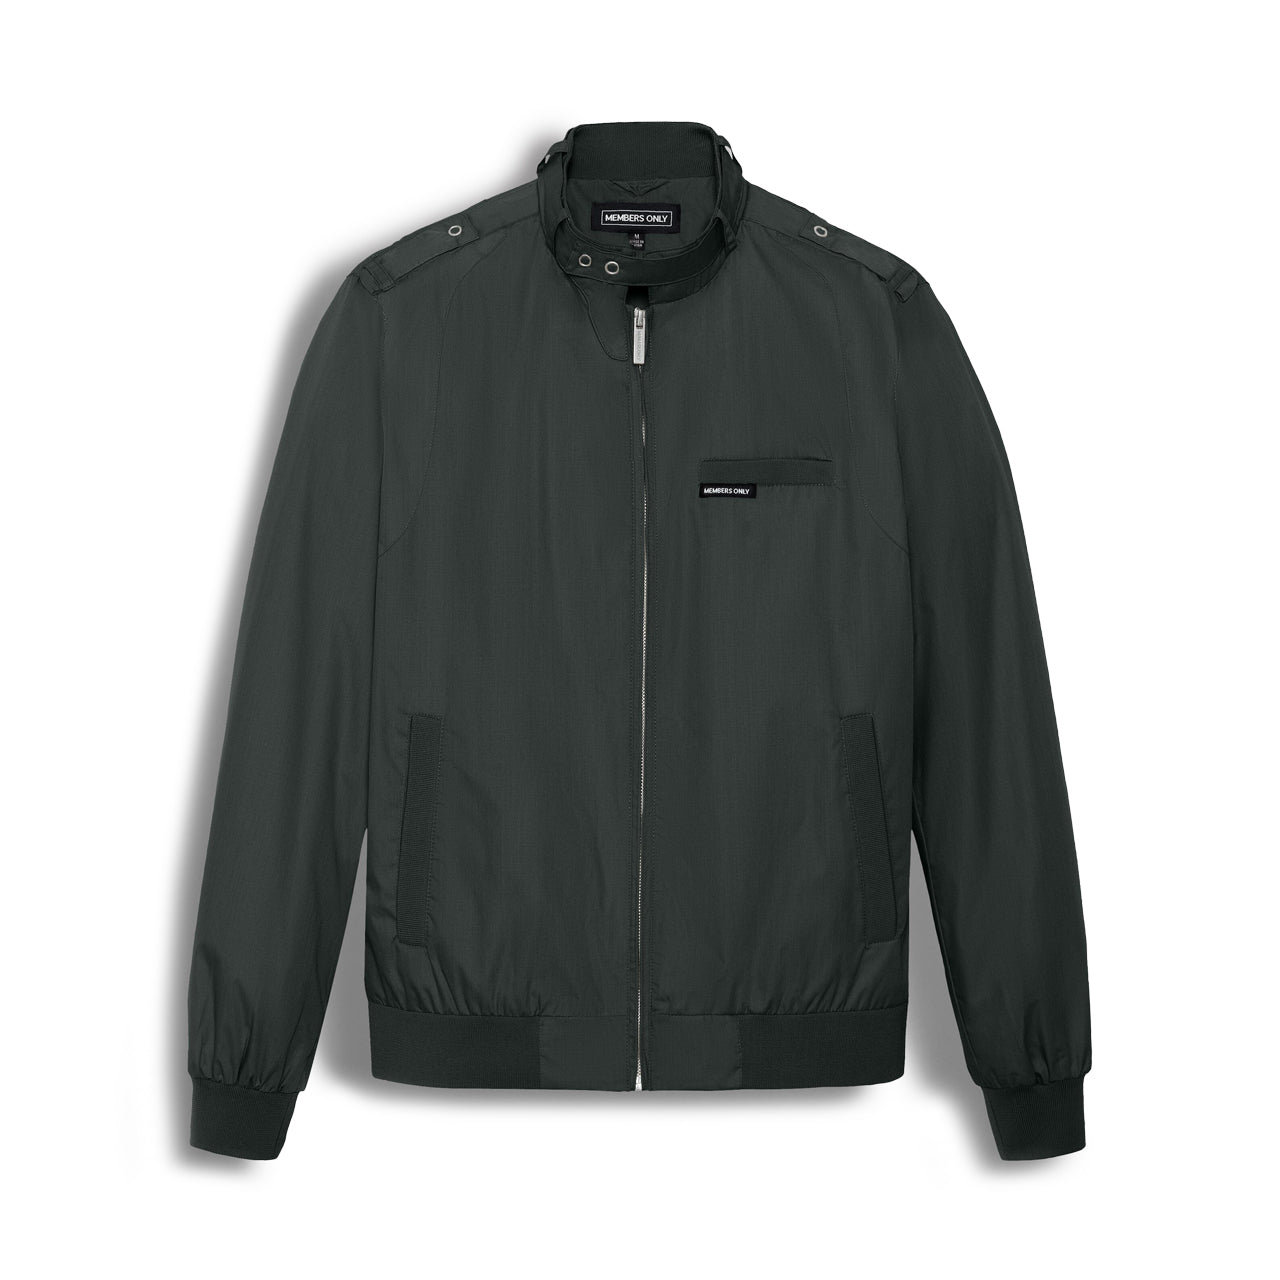 Members Only Original Iconic Racer Jacket for Men